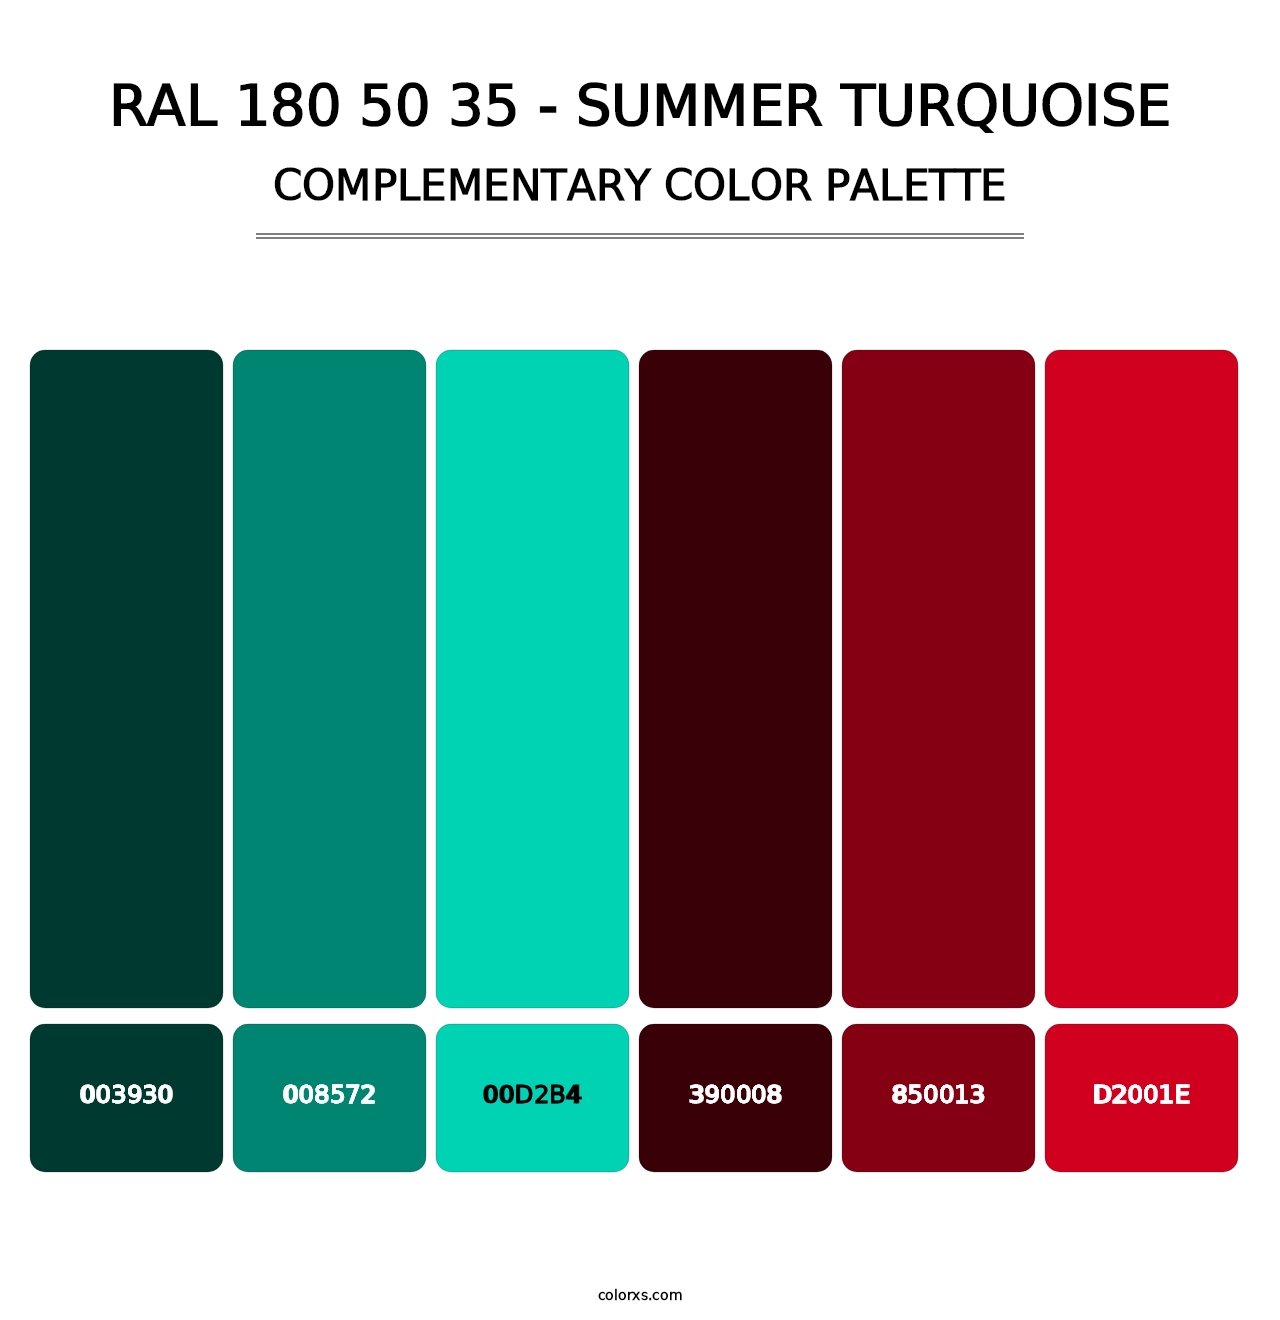 RAL 180 50 35 - Summer Turquoise - Complementary Color Palette